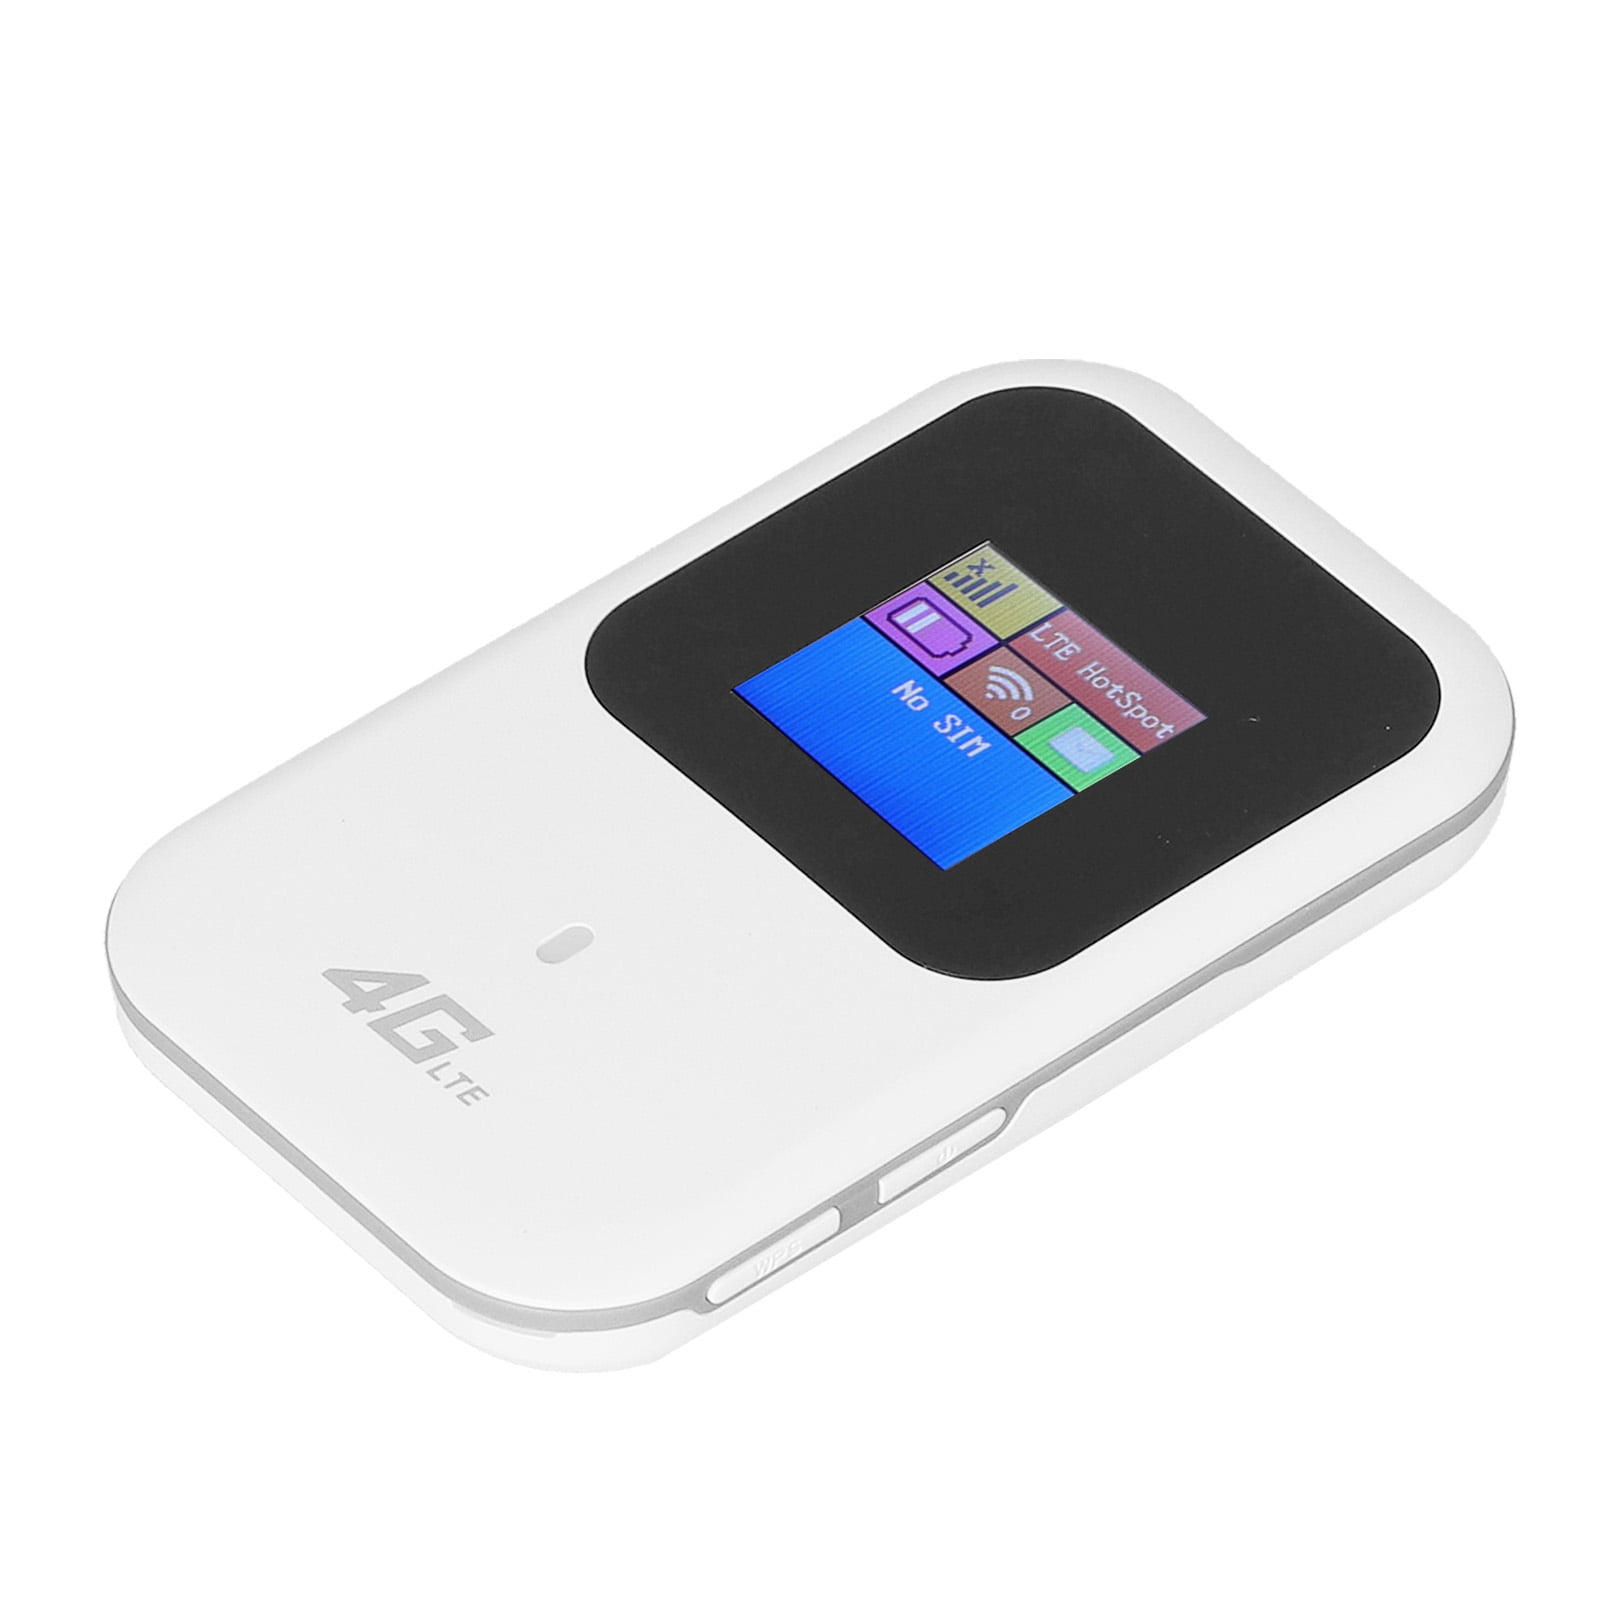 Portable Wifi for Travel: Your Essential Mobile Wifi Device